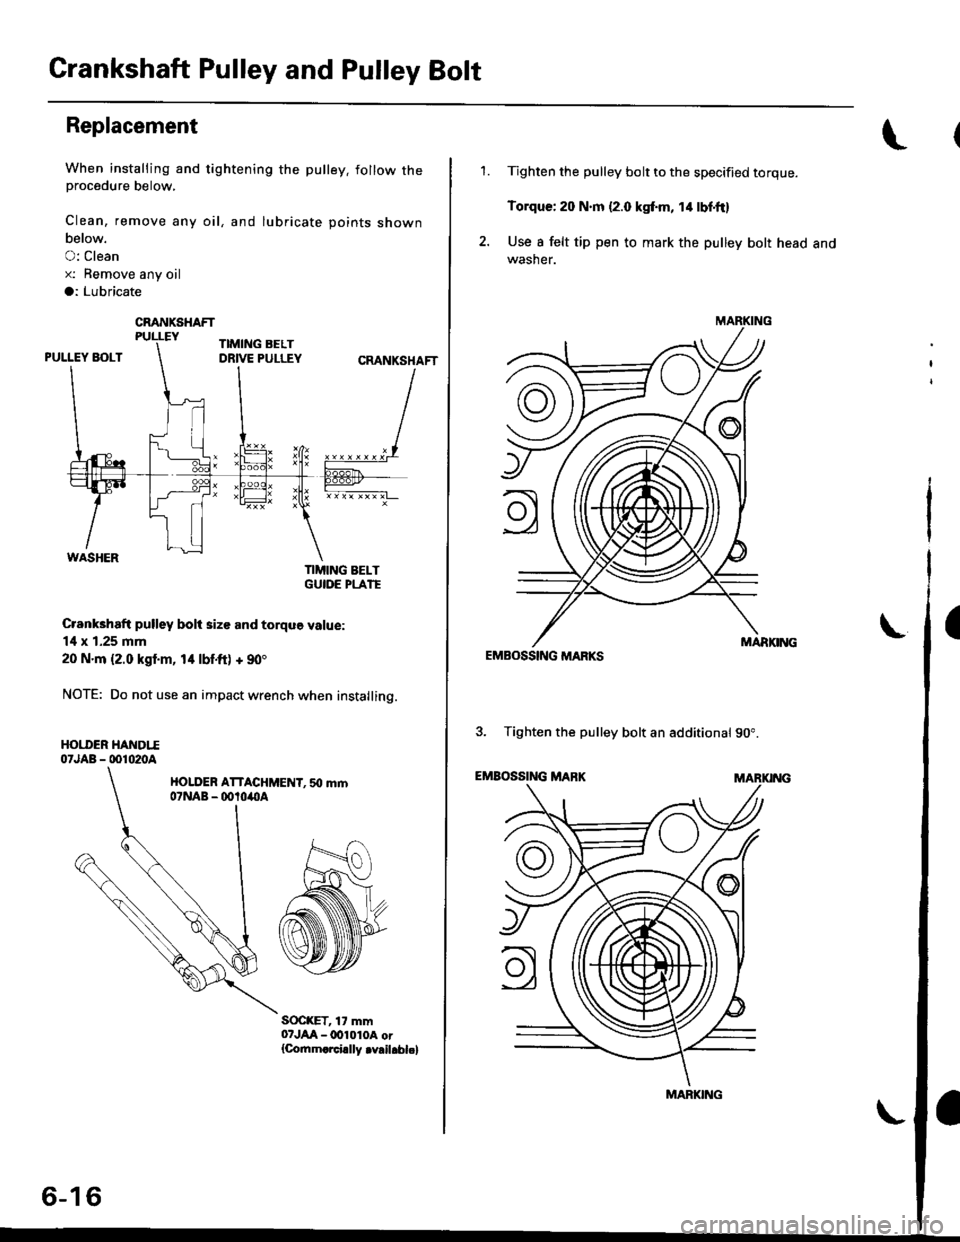 HONDA CIVIC 1999 6.G Workshop Manual Crankshaft Pulley and Pulley Bolt
Replacement
When installing and tightening the pulley. follow theprocedure below,
Clean, remove any oil, and lubricate points shown
below.
O: Clean
x: Bemove any oil
